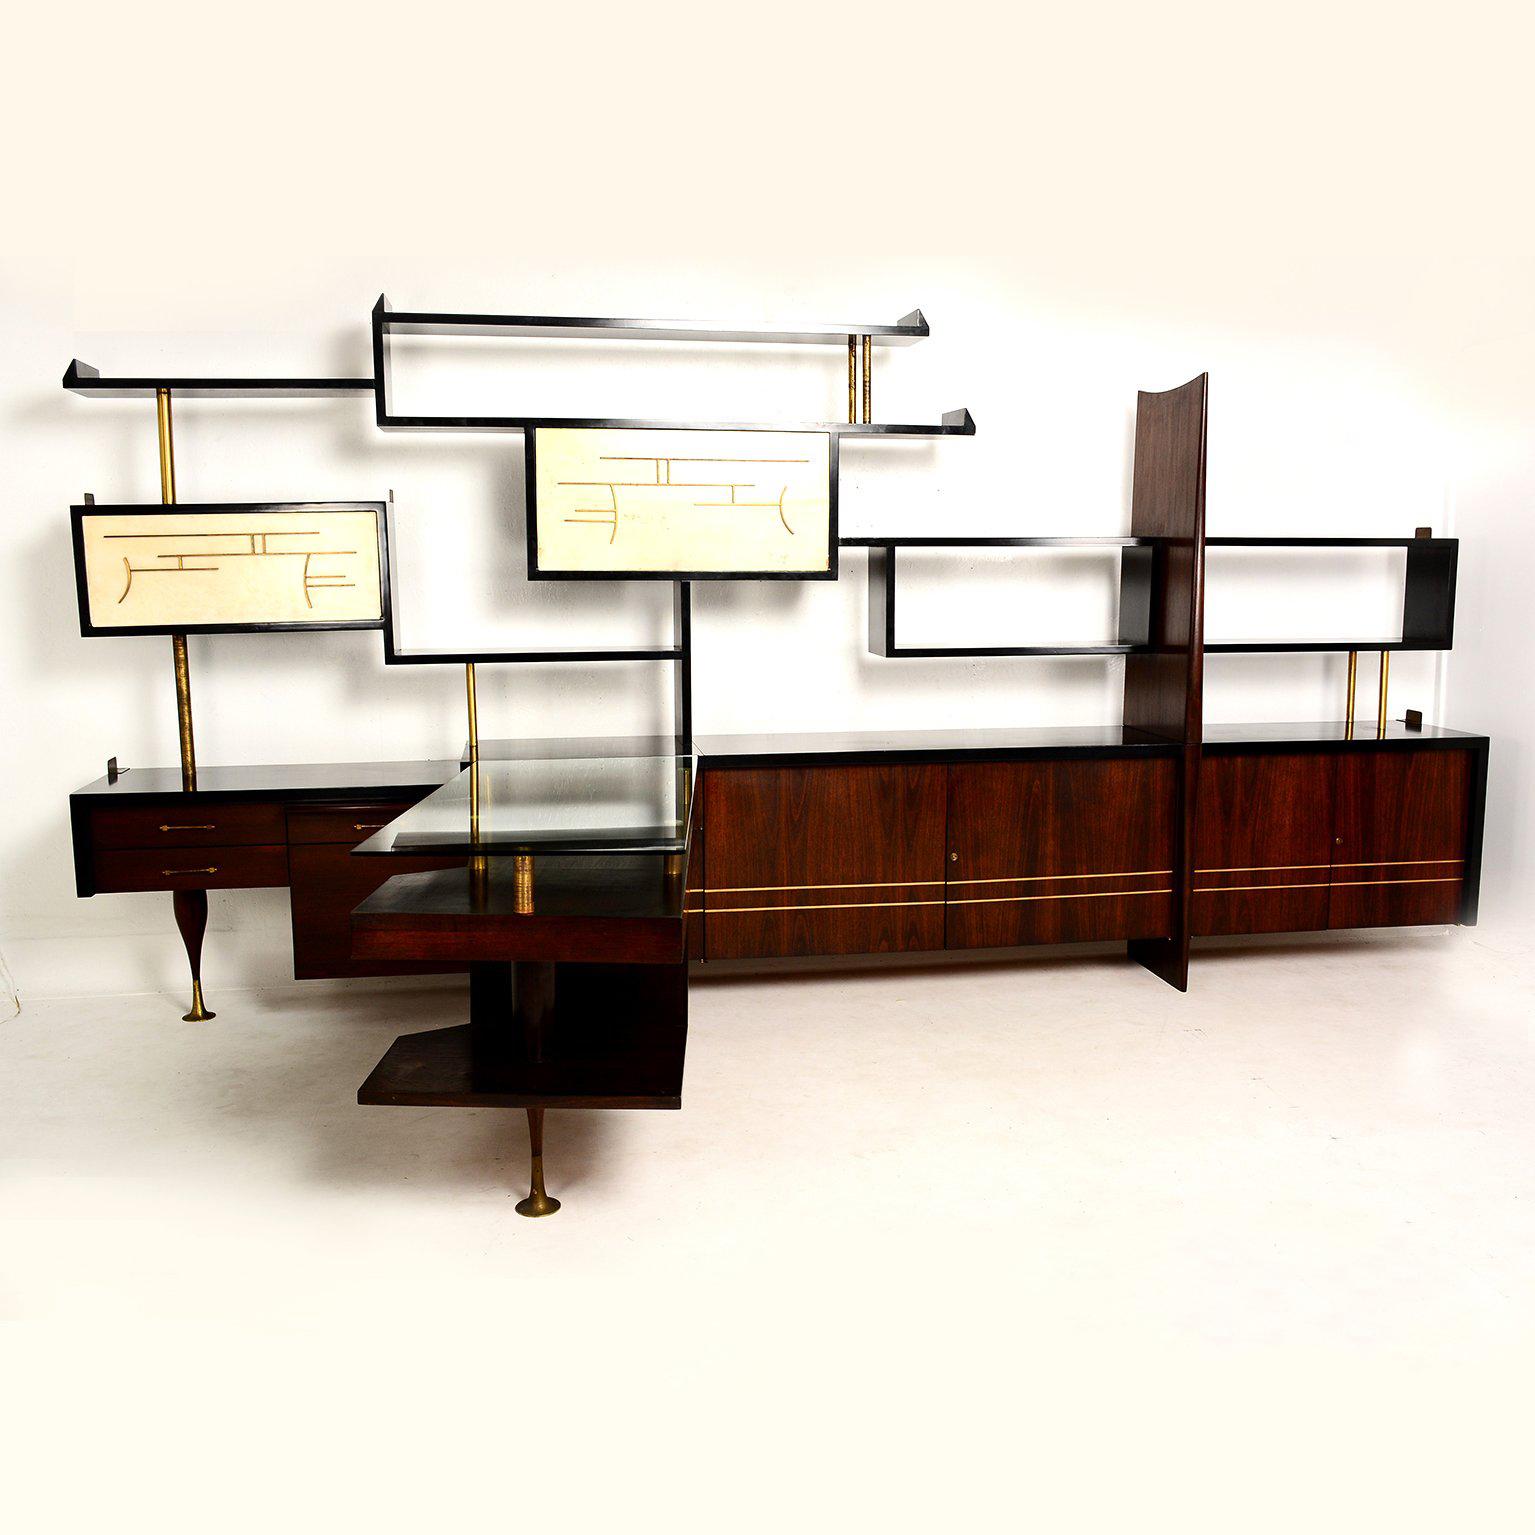 For your consideration a beautiful custom made wall unit with built in desk. Attributed to Eugenio Escudero, Mexico City Circa 1950s.

Features a corner desk with new glass top (3/8